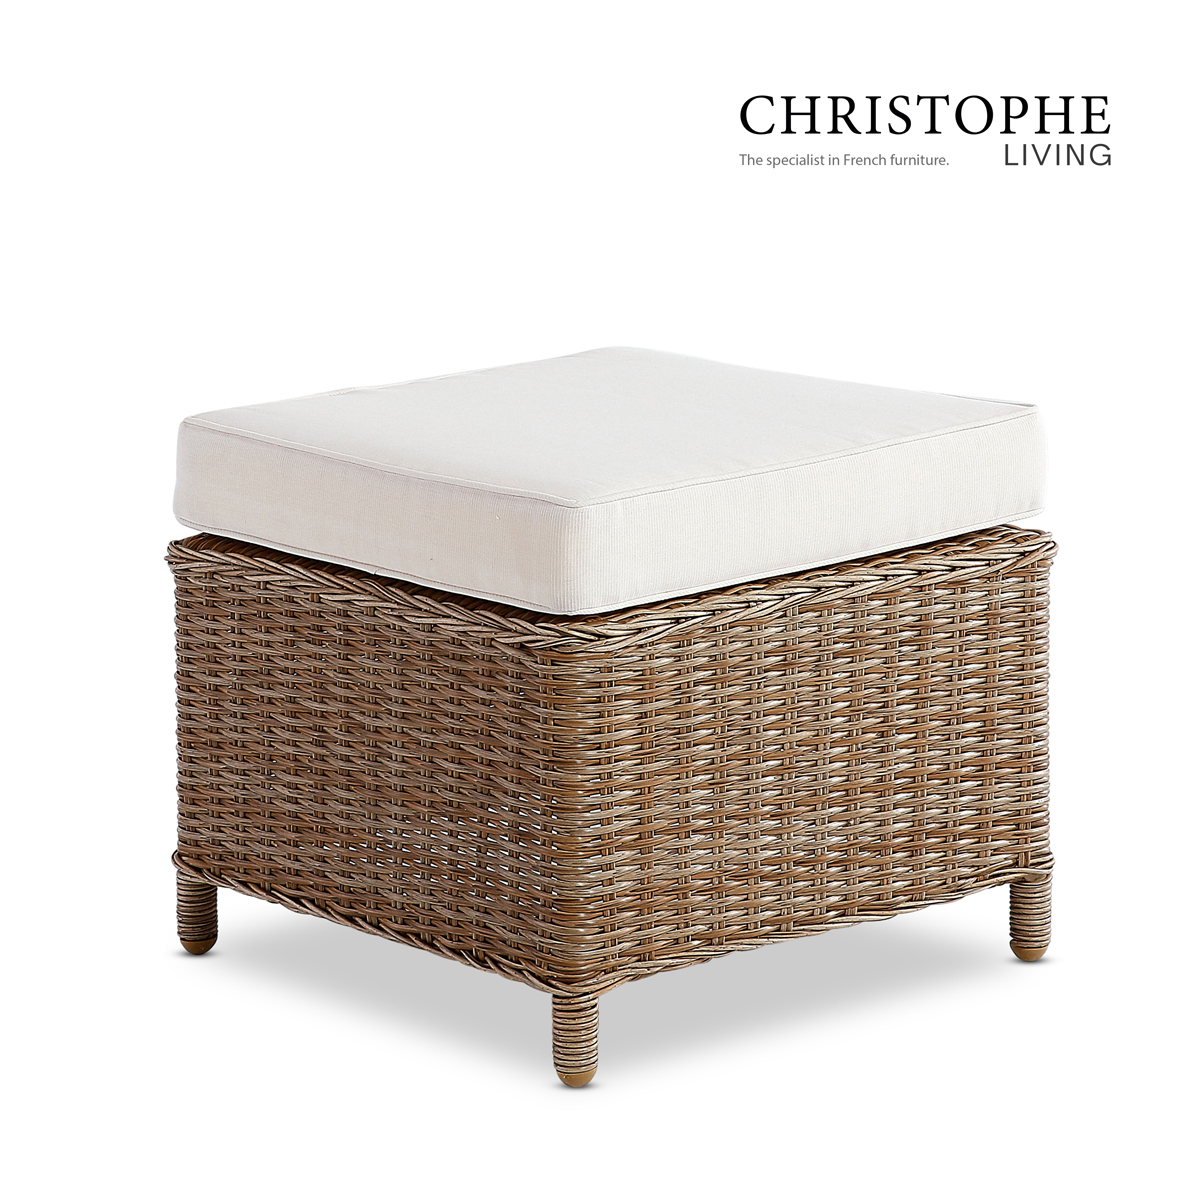 Whitehaven Classic Wicker Footstool in Natural with Water-Resistant Fabric